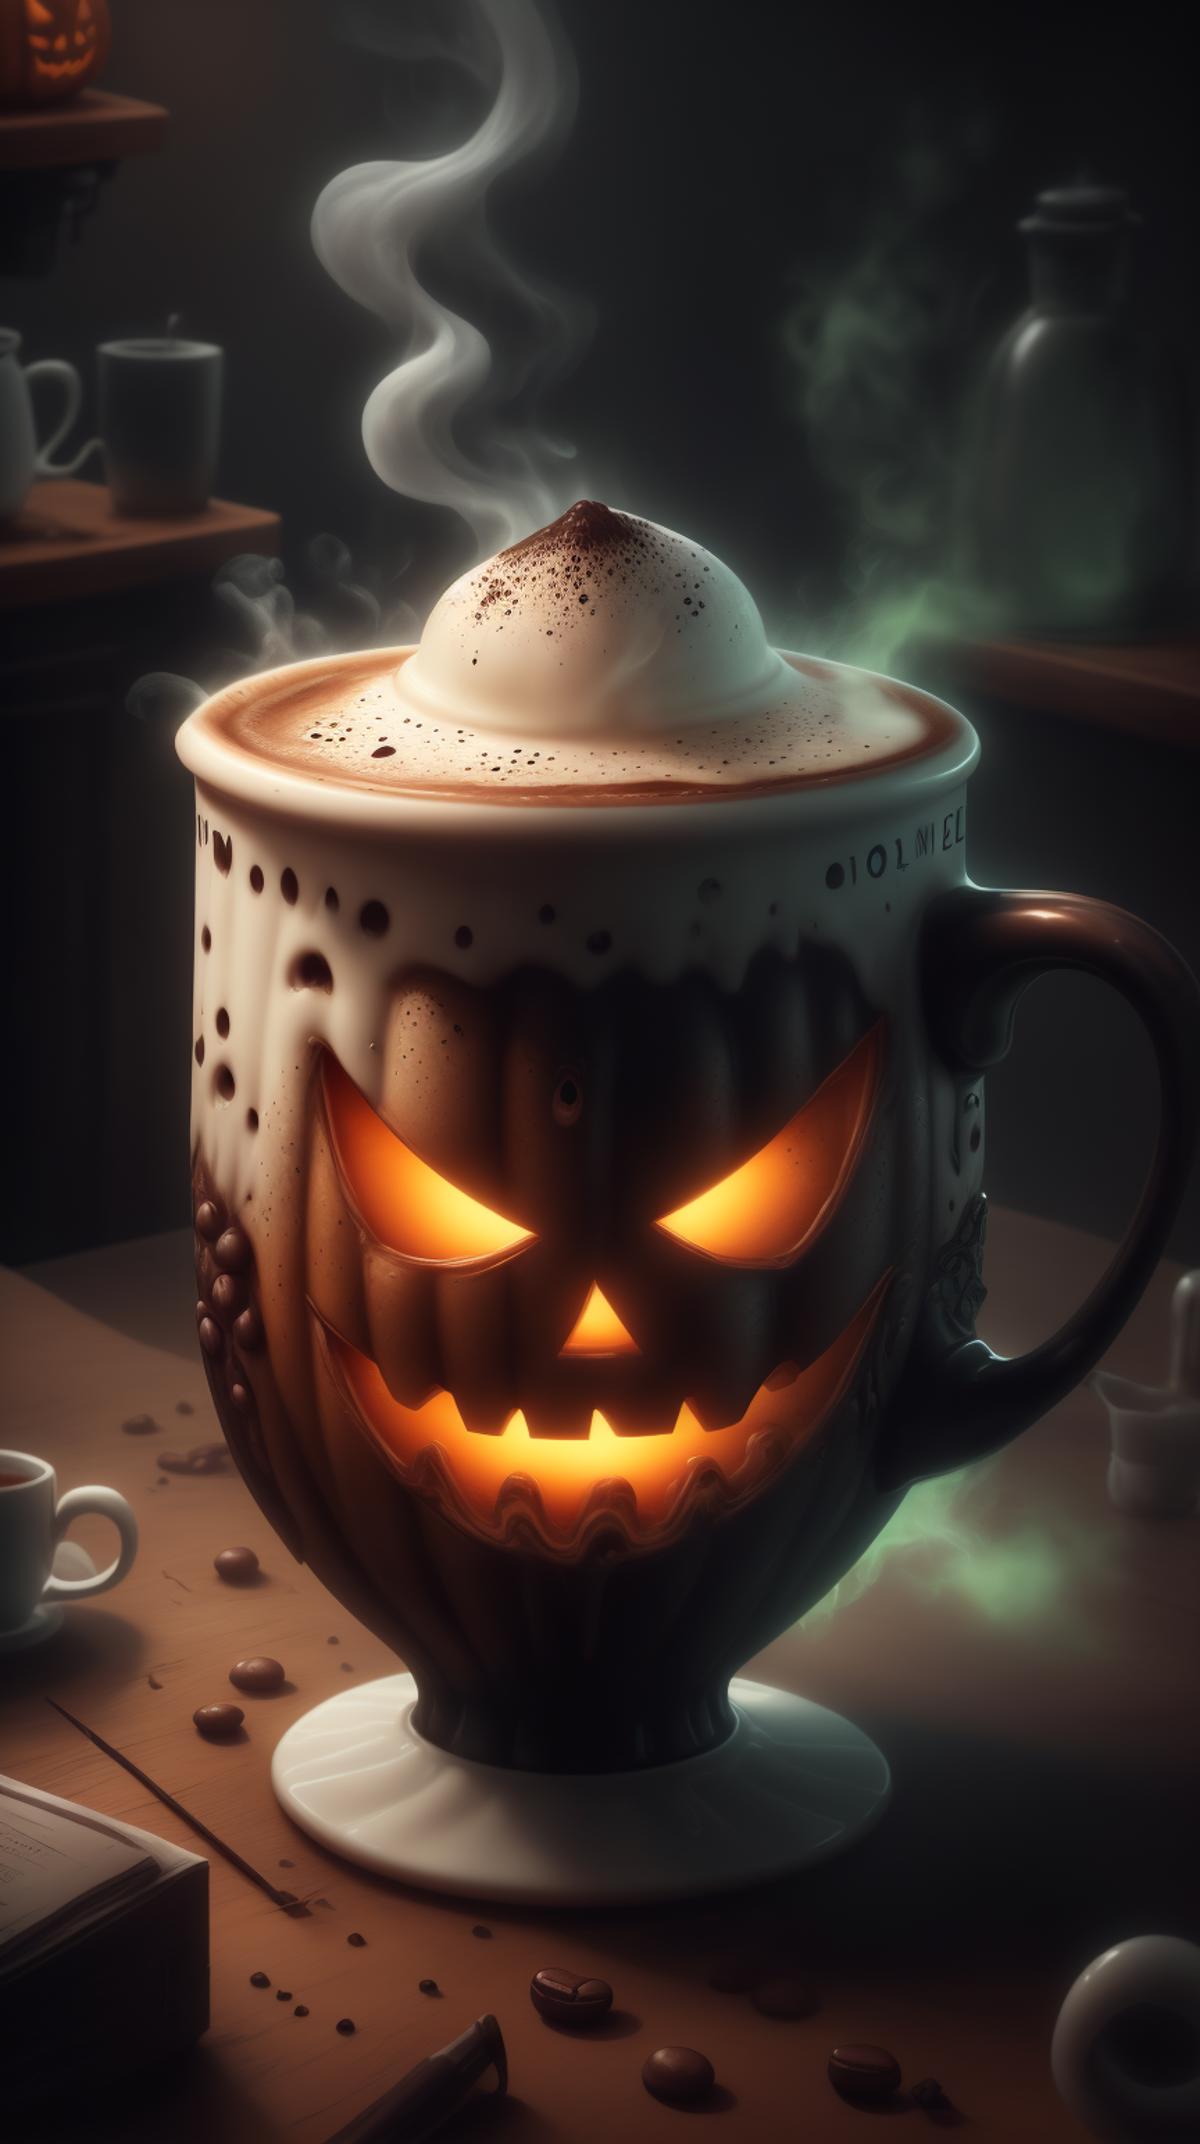 A scary pumpkin coffee mug on a table with smoke coming out of it, in front of a green background.